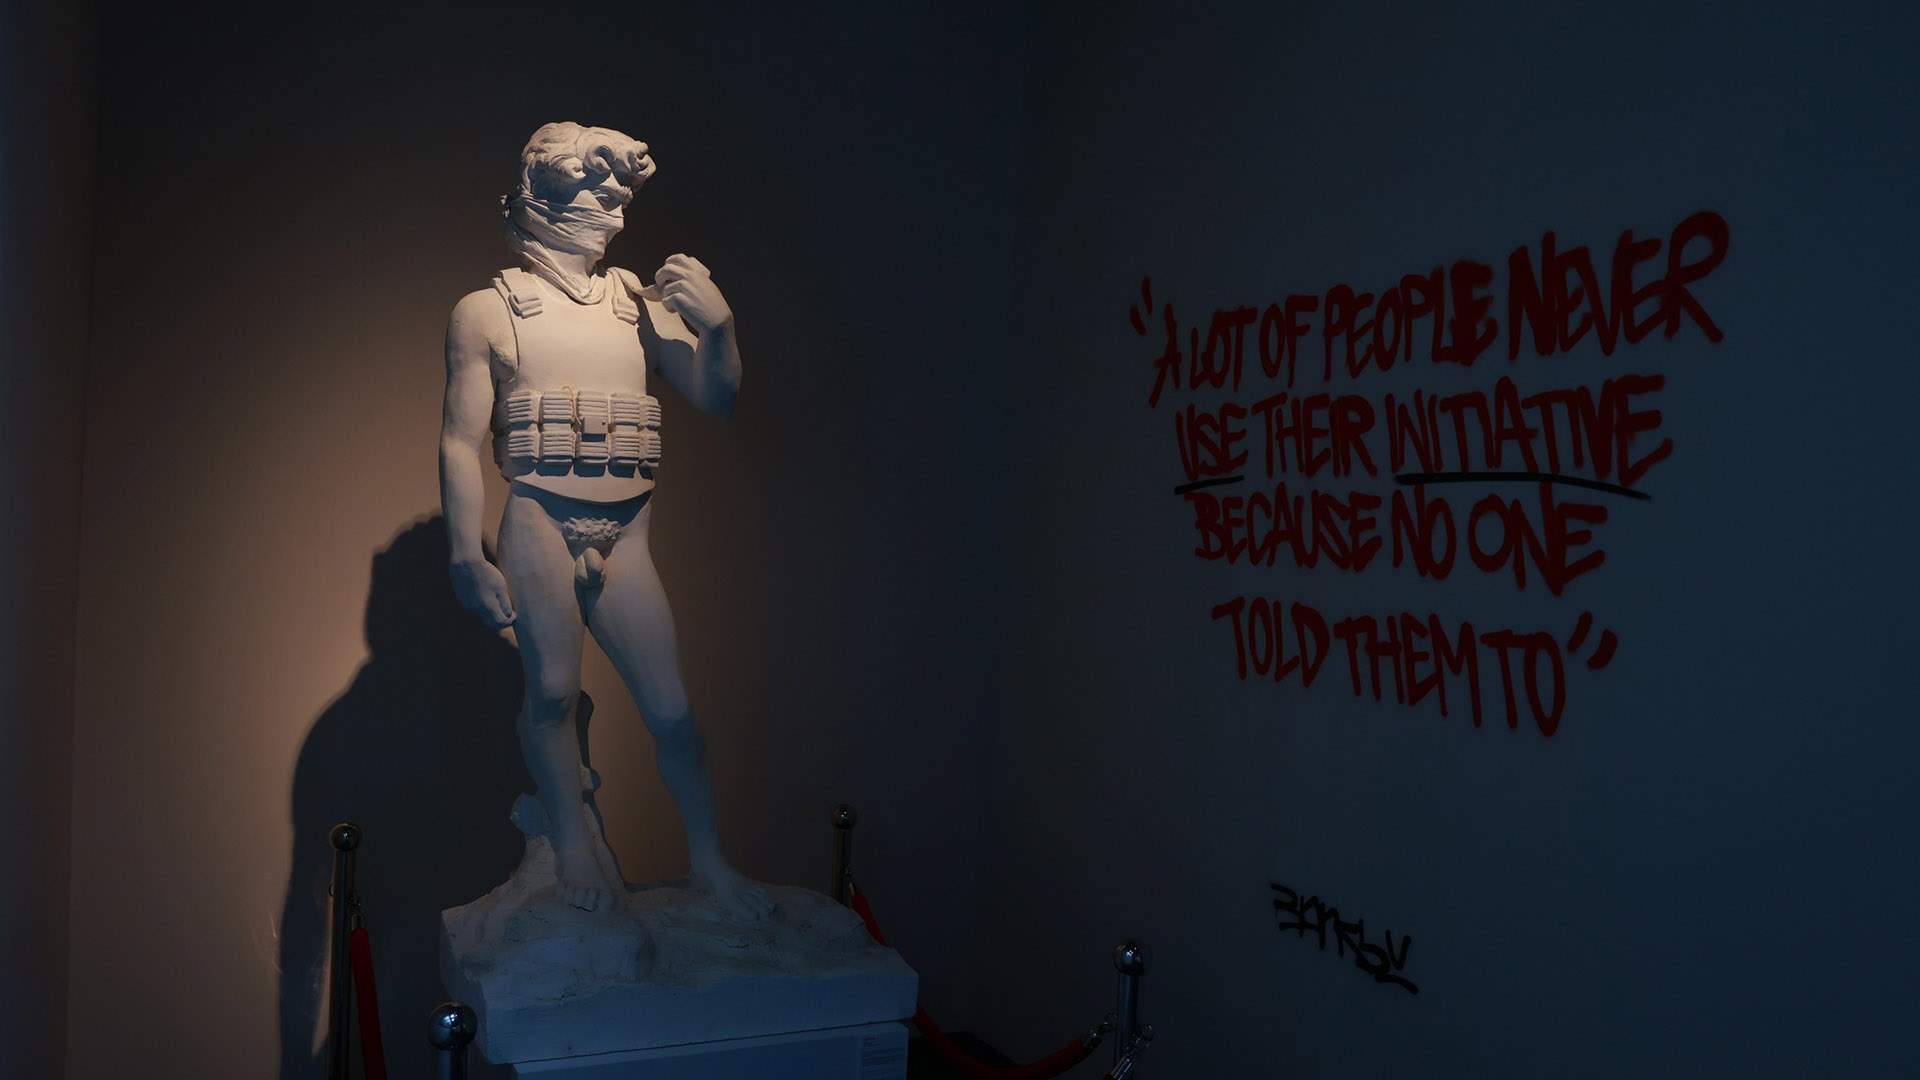 A Big Banksy Exhibition Featuring More Than 150 Artworks Is Touring Australia